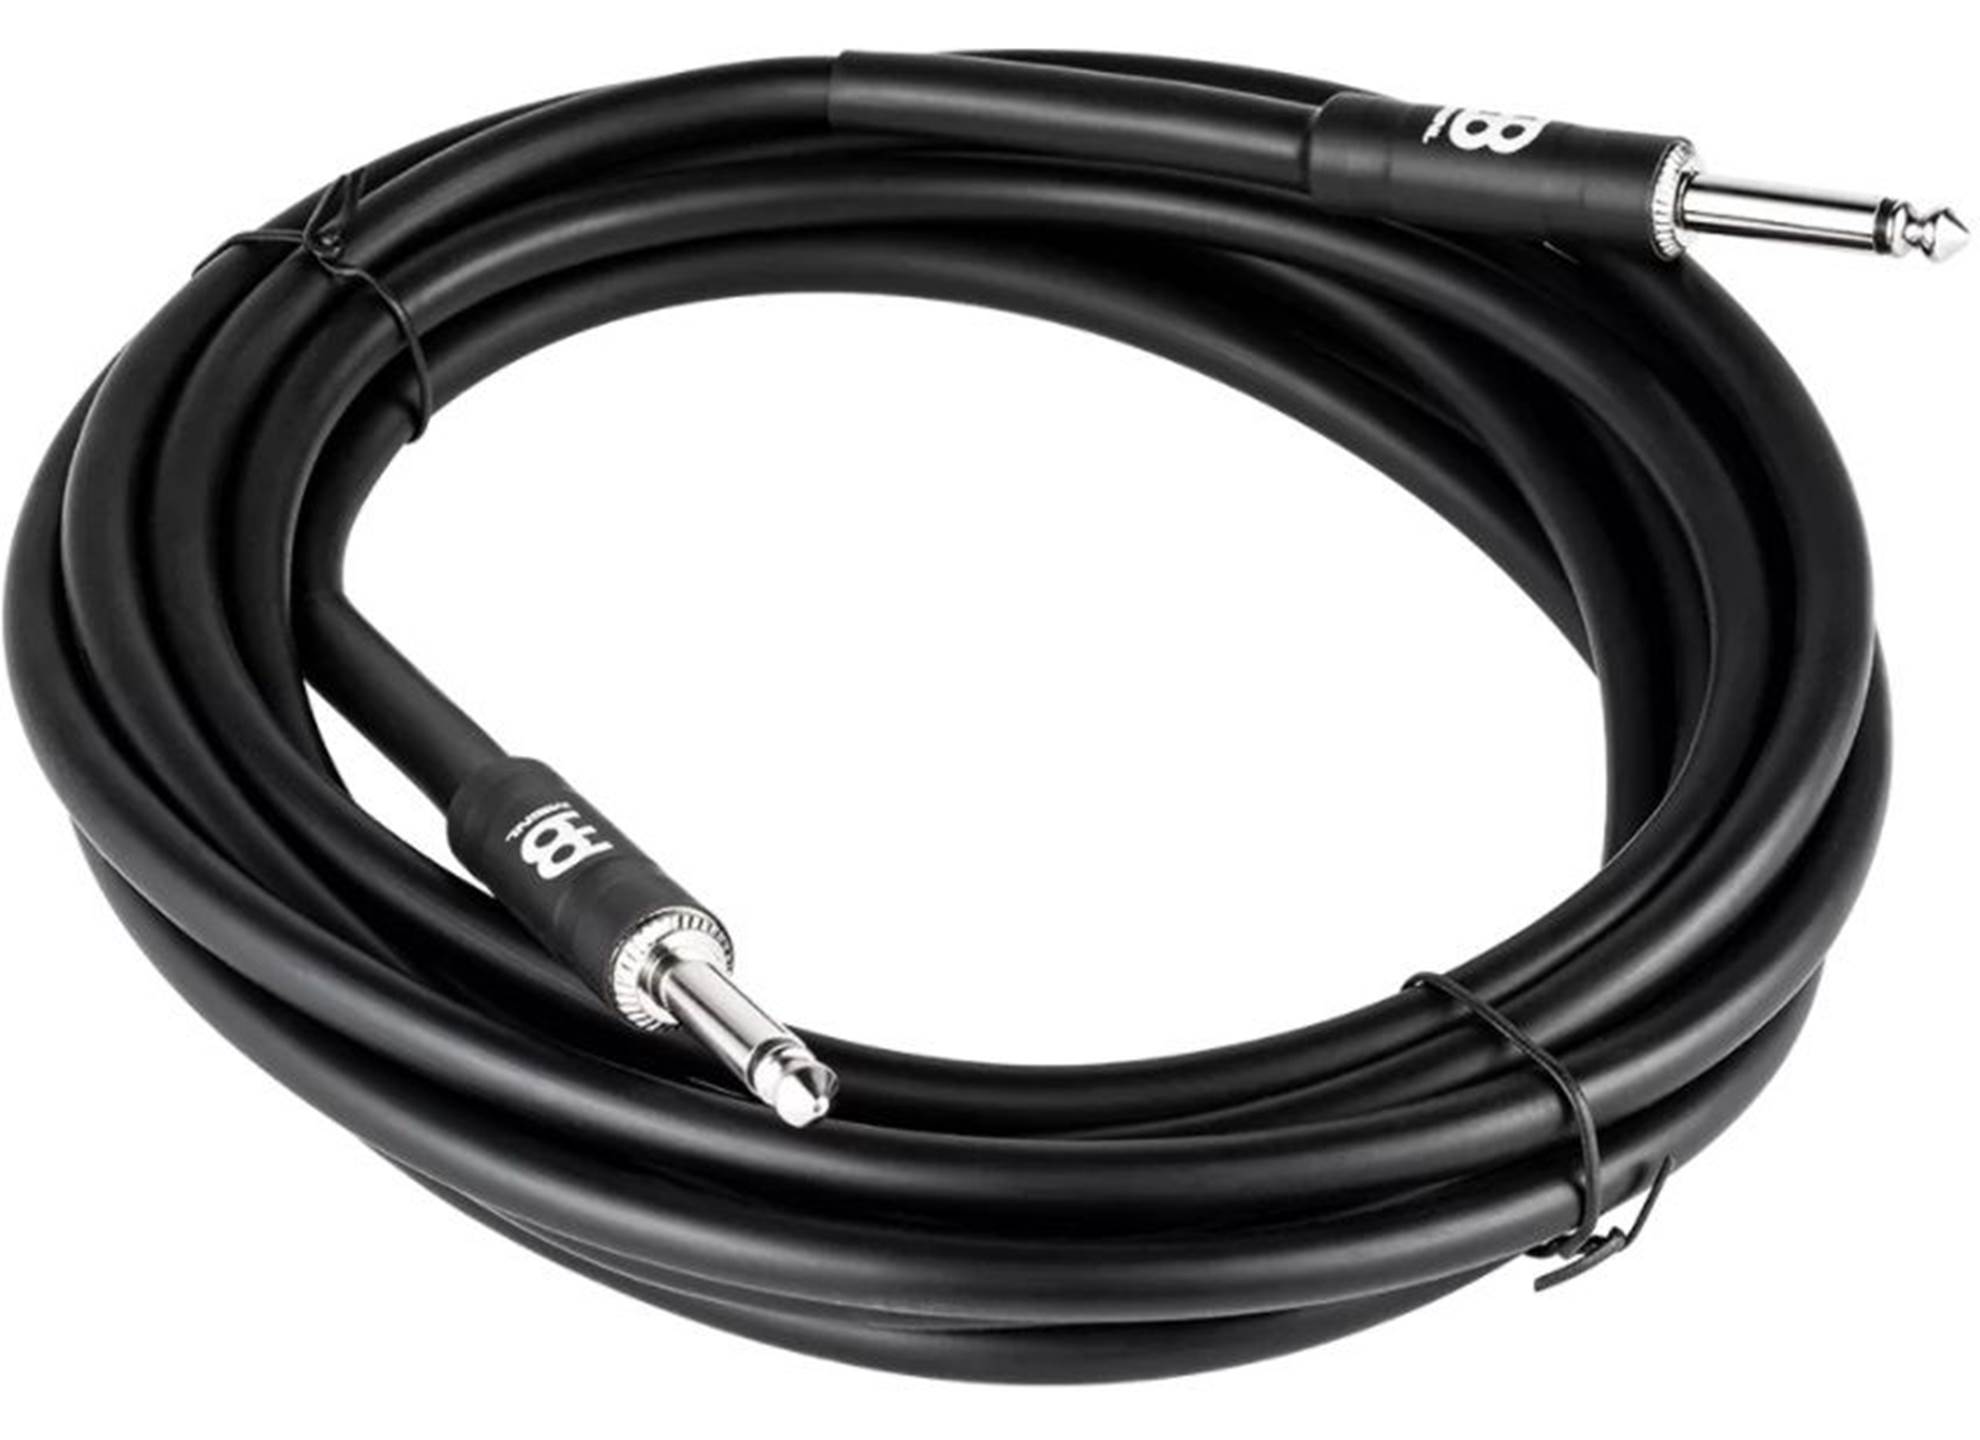 MPIC-20 Meinl Percussion 20ft Instrument Cable